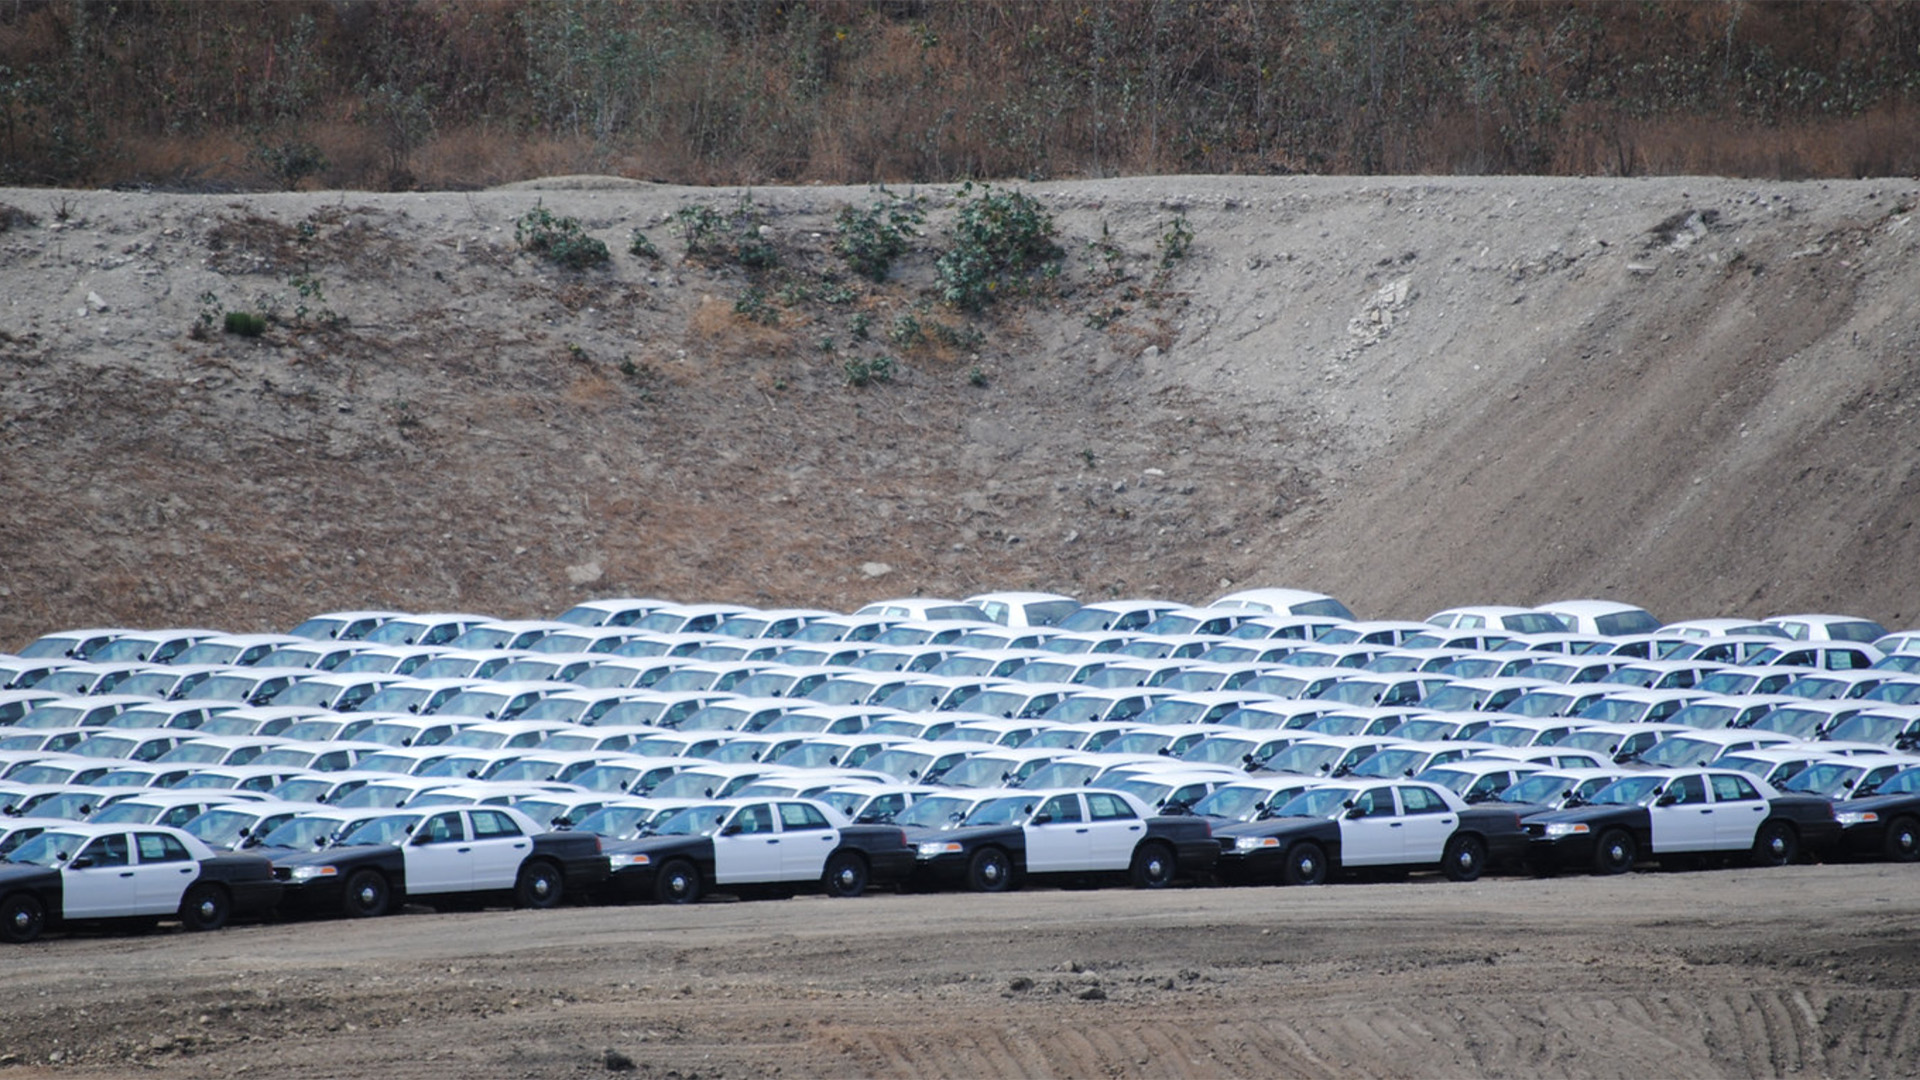 LA Sheriff Still Has 429 Ford Crown Victorias in Service Because It Stockpiled Them